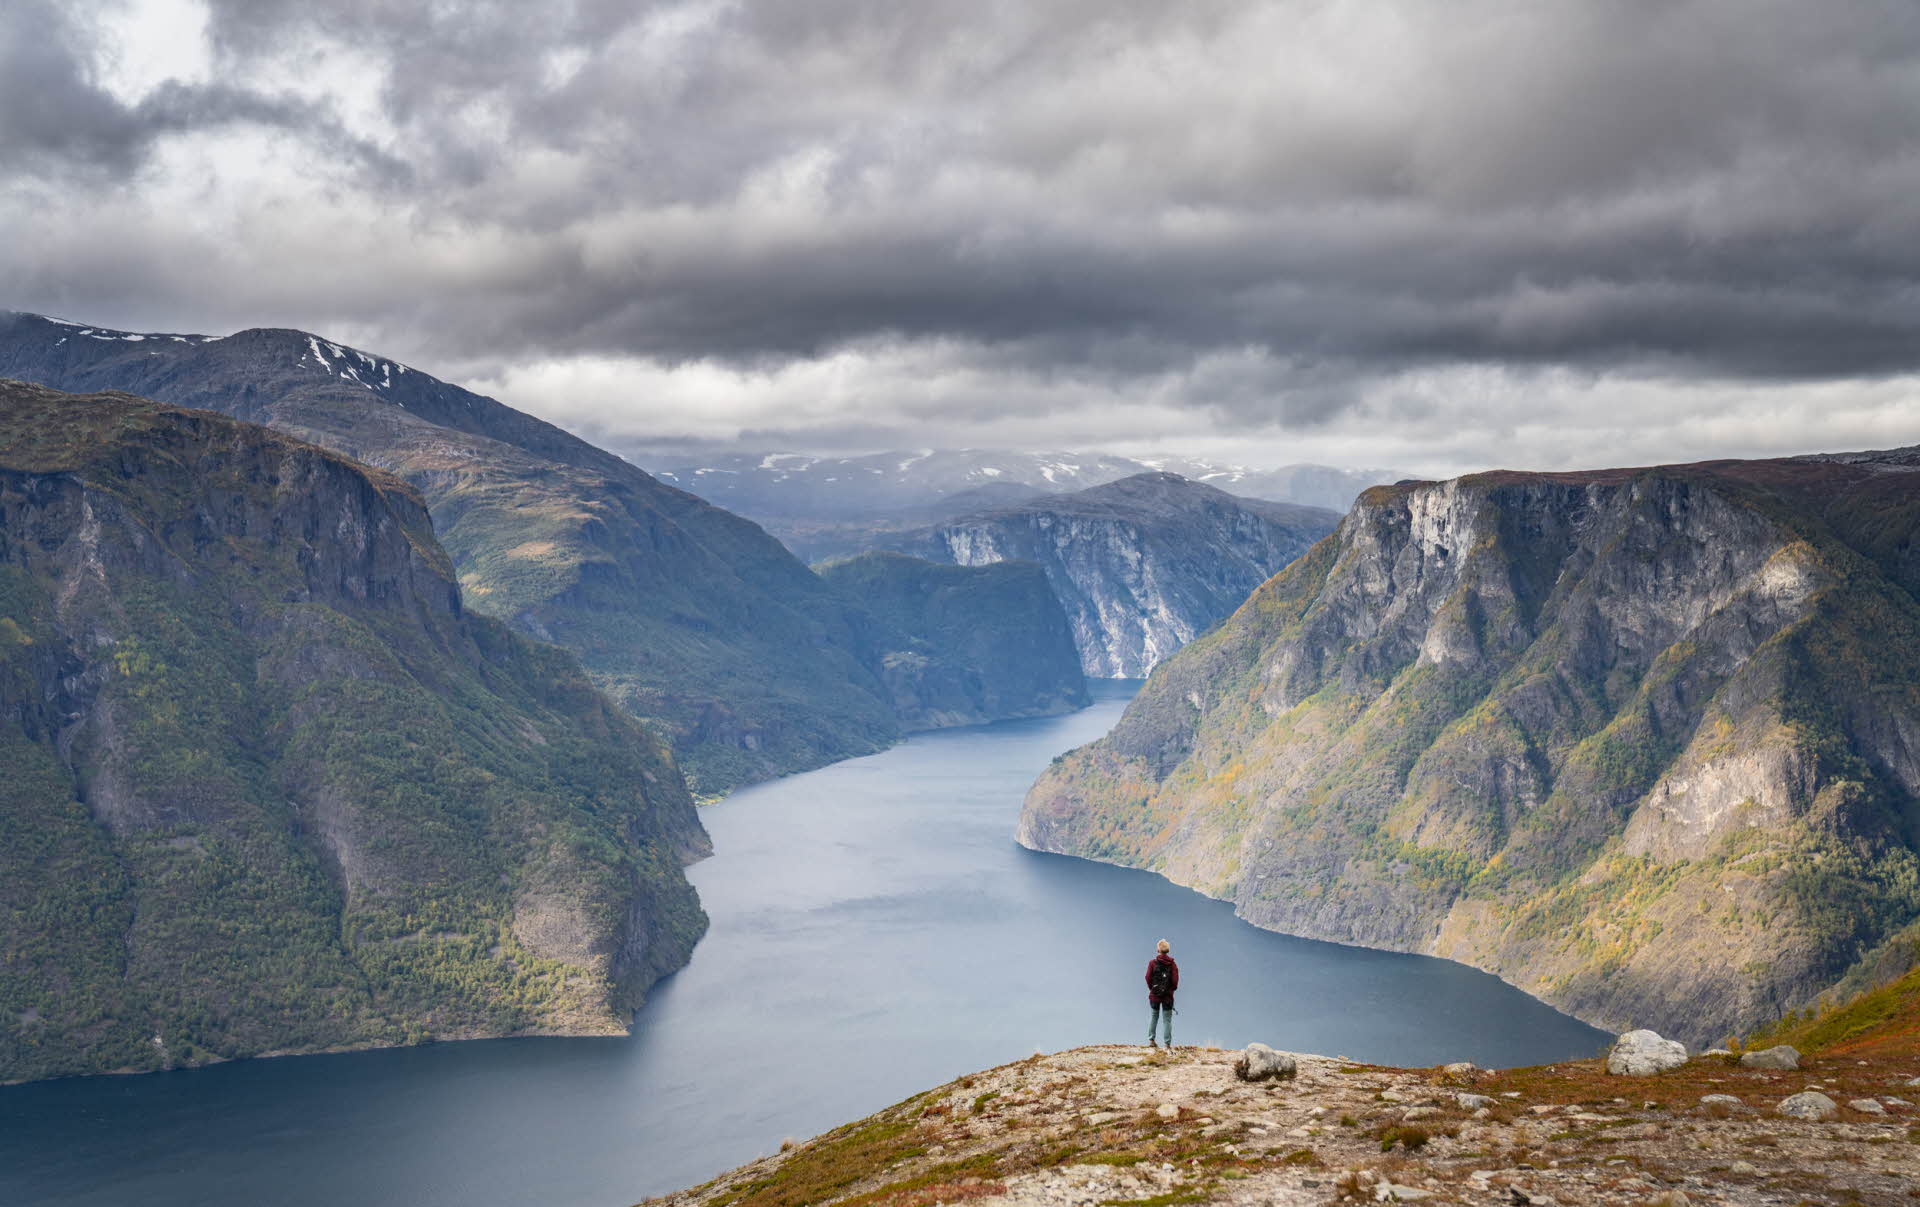 A person standing on Mt. Prest looking at the Aurlandsfjord on a cloudy autumn day